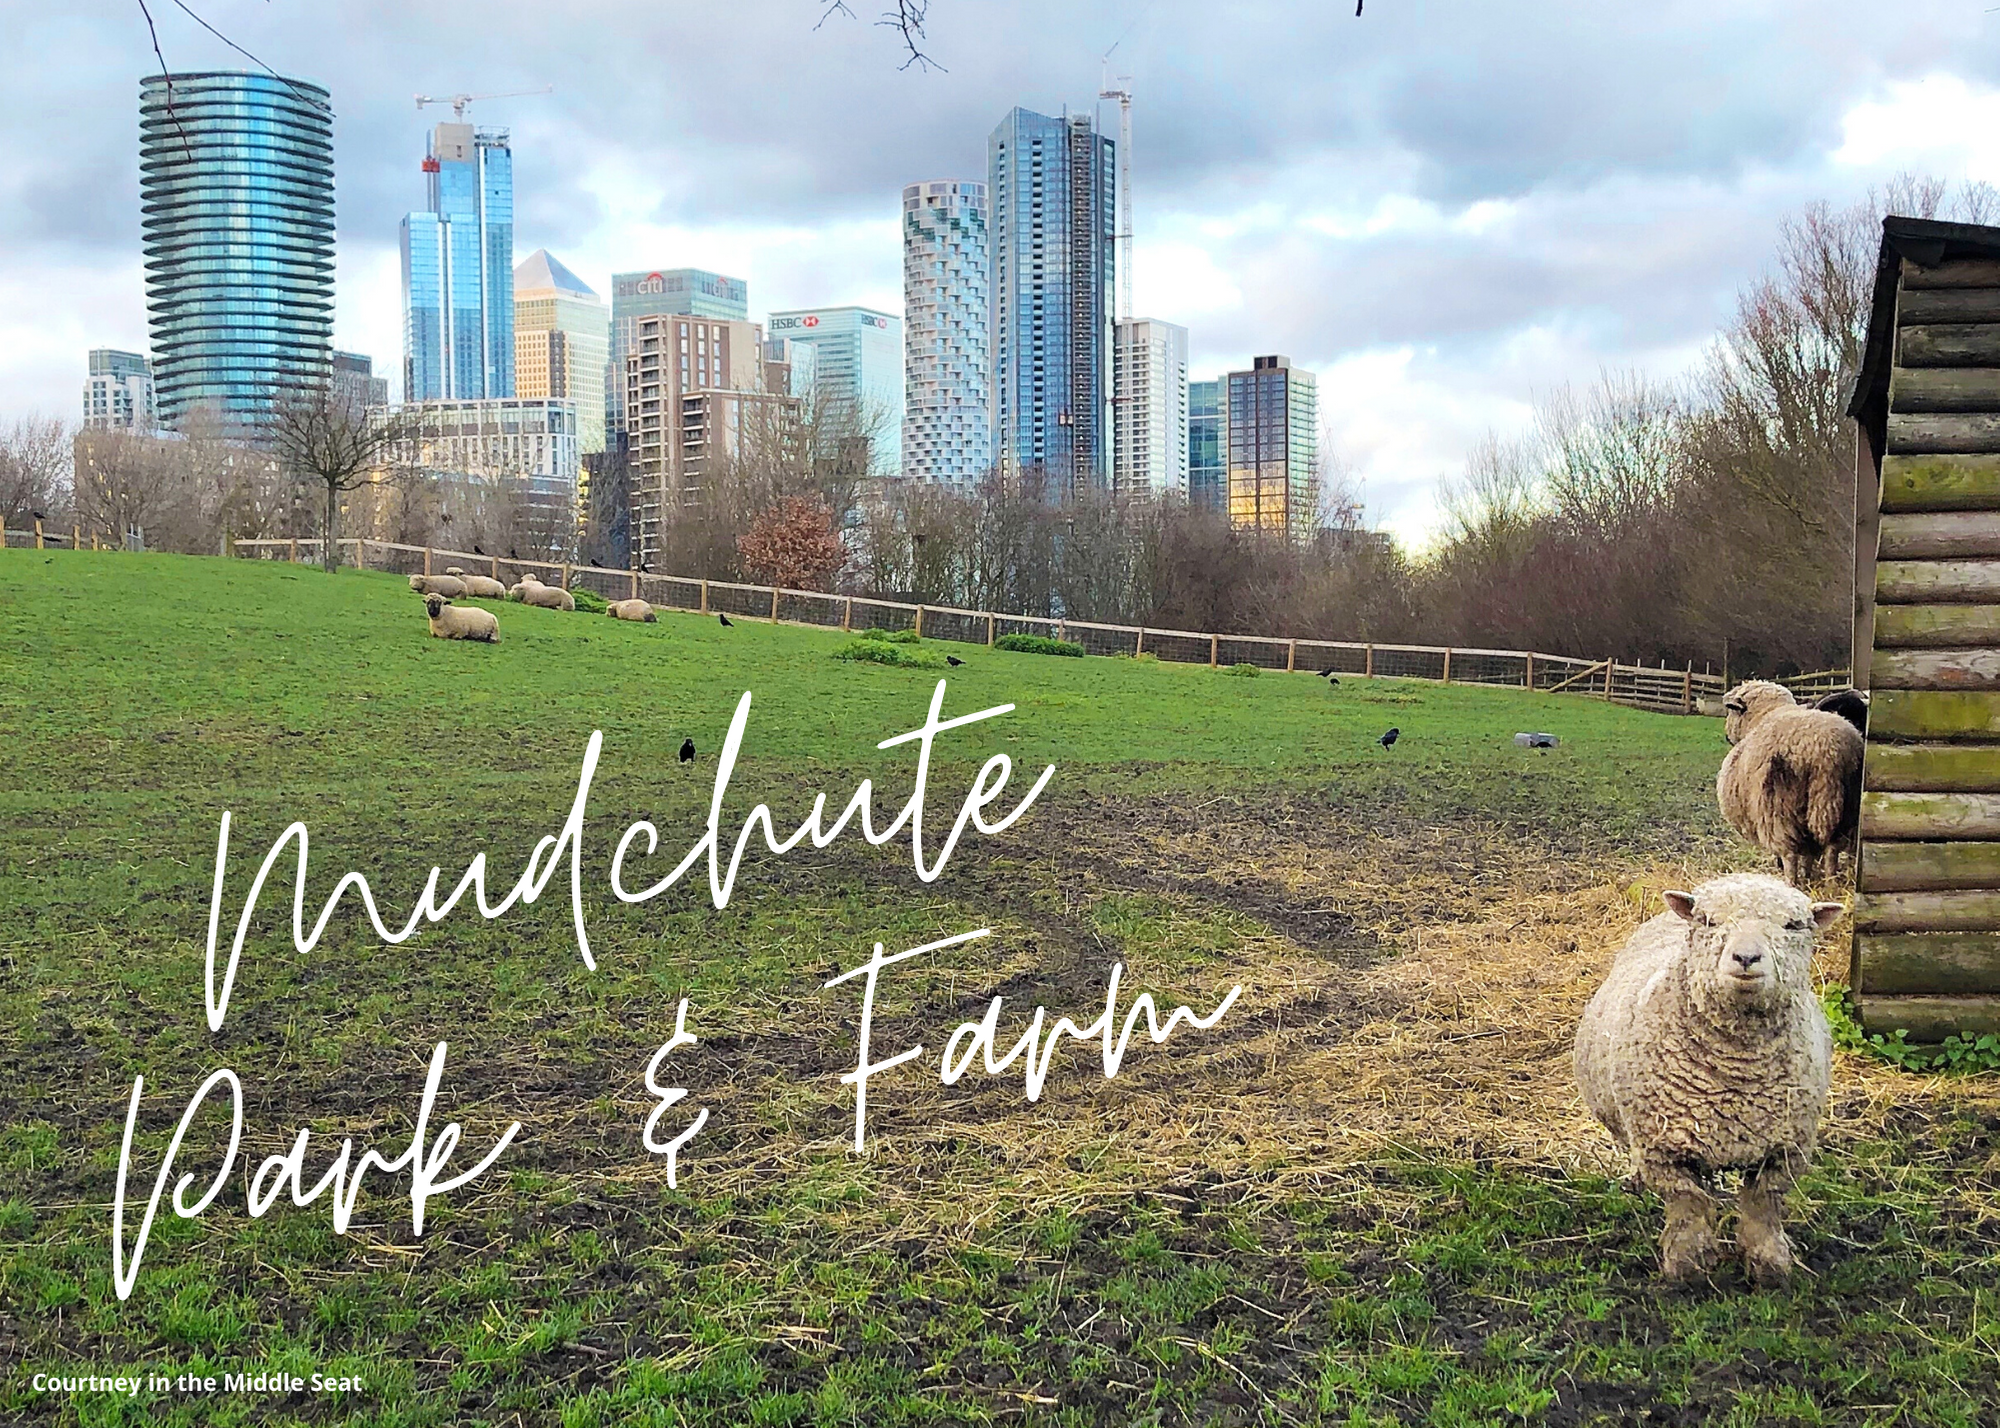 Visit Mudchute Park and Farm in London